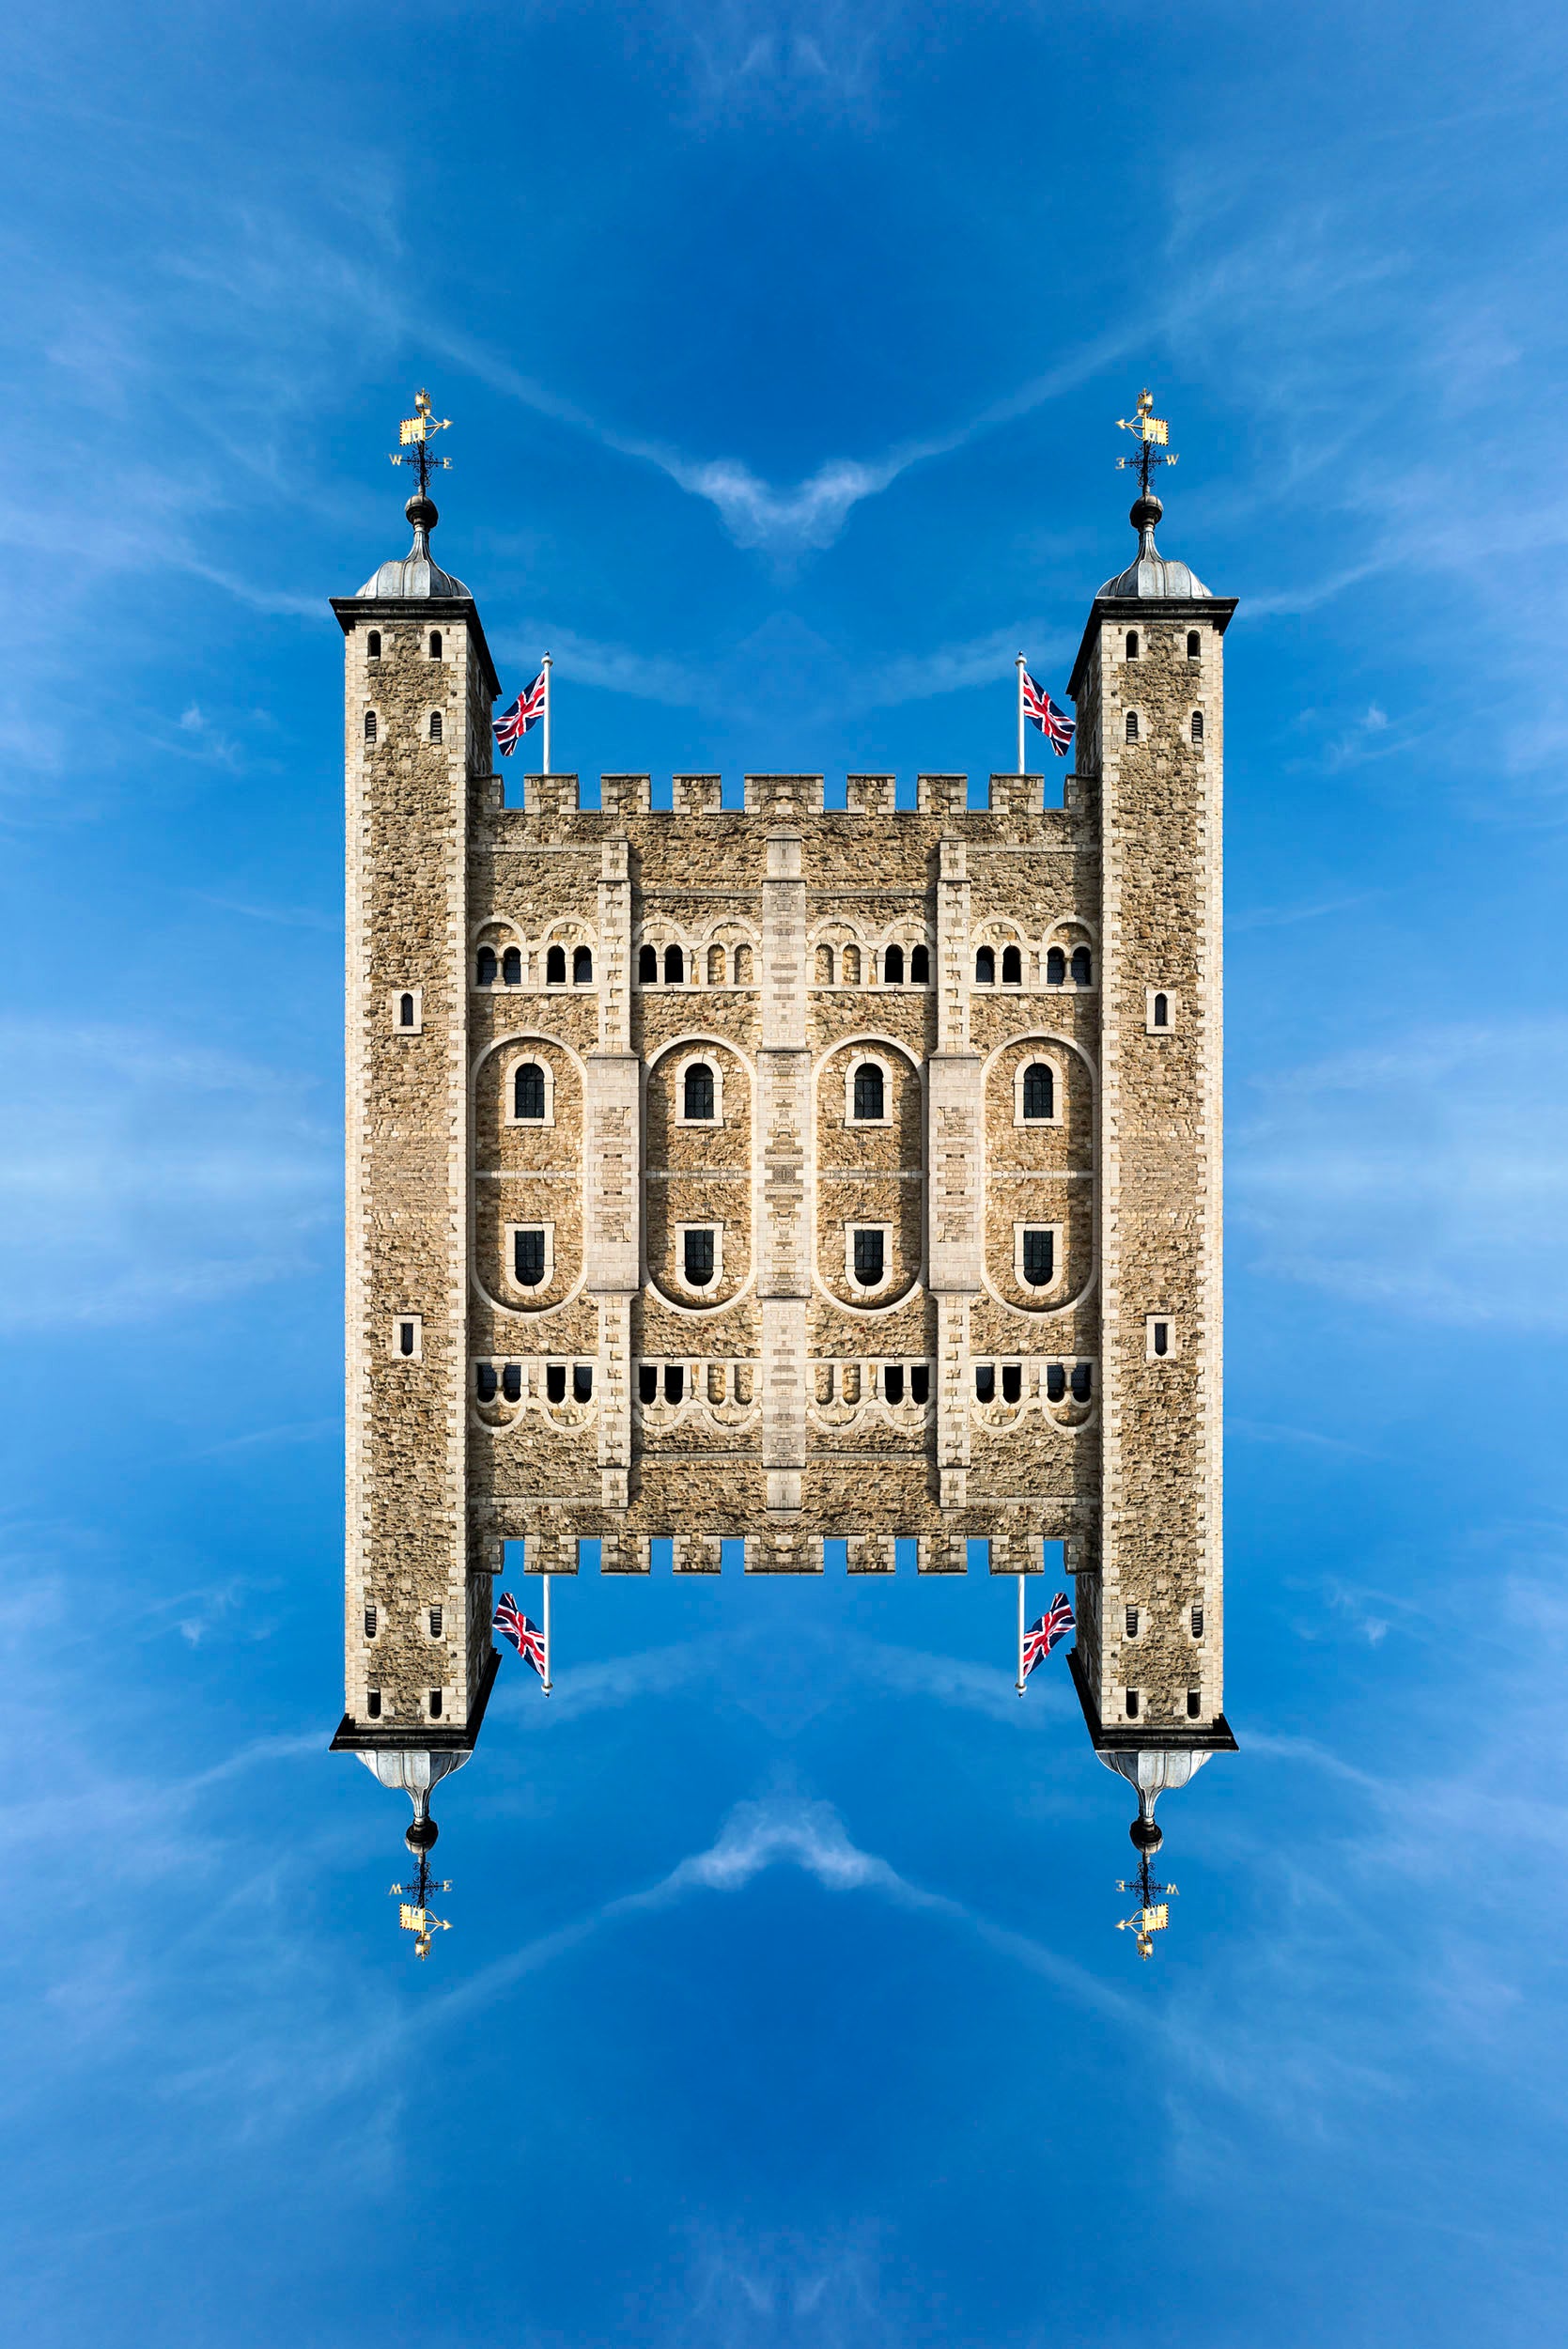 Daniel-Sambraus-Tower-Of-London-Limited-Edition-Digital-Photography-TAP-Galleries, Essex gallery 